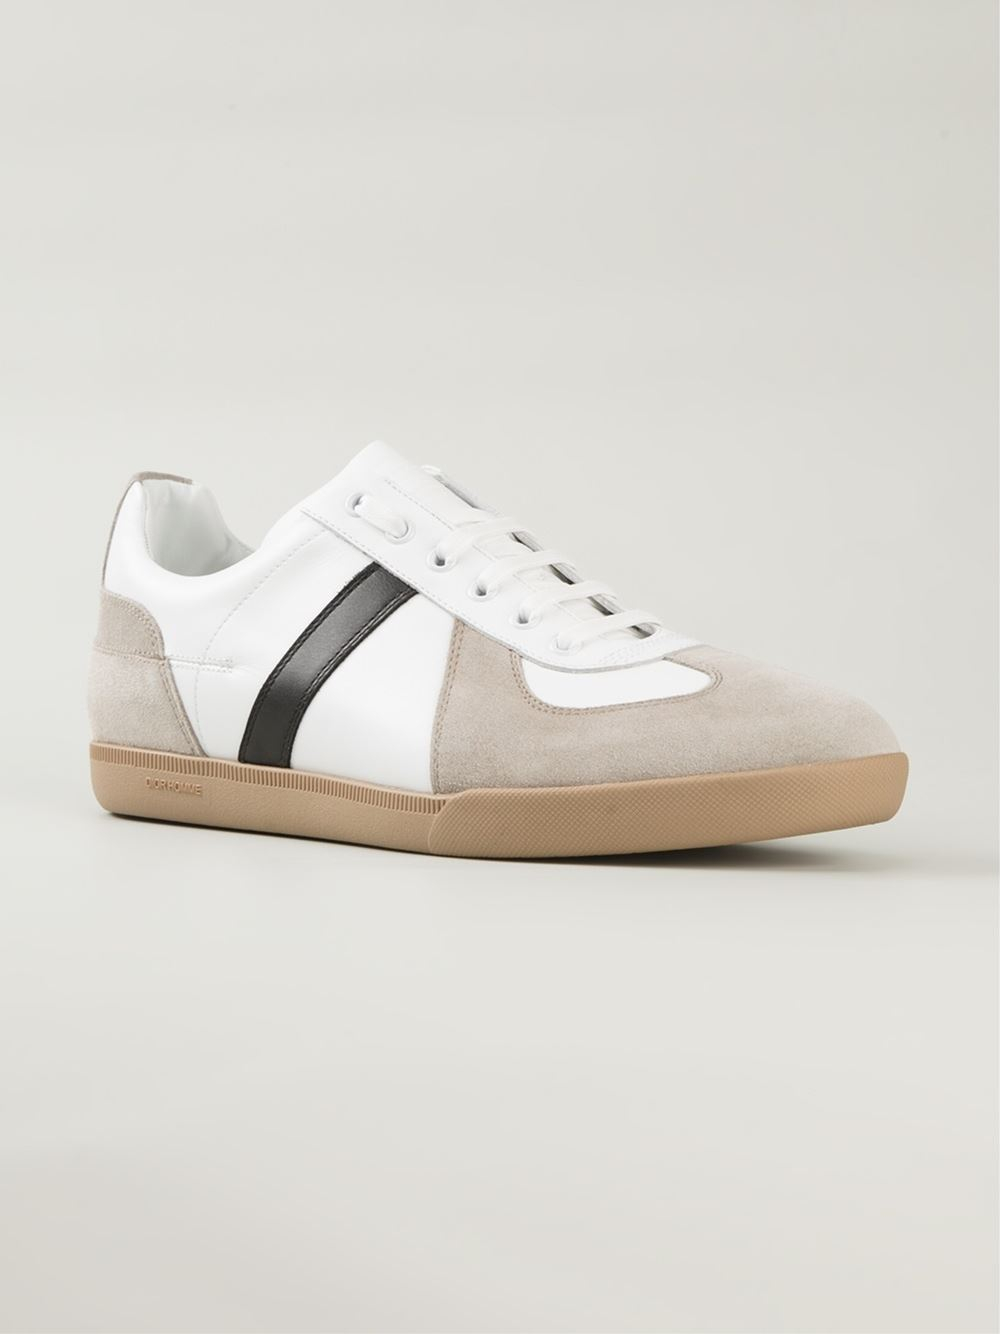 Dior Homme Panelled Sneakers in White (Natural) for Men - Lyst